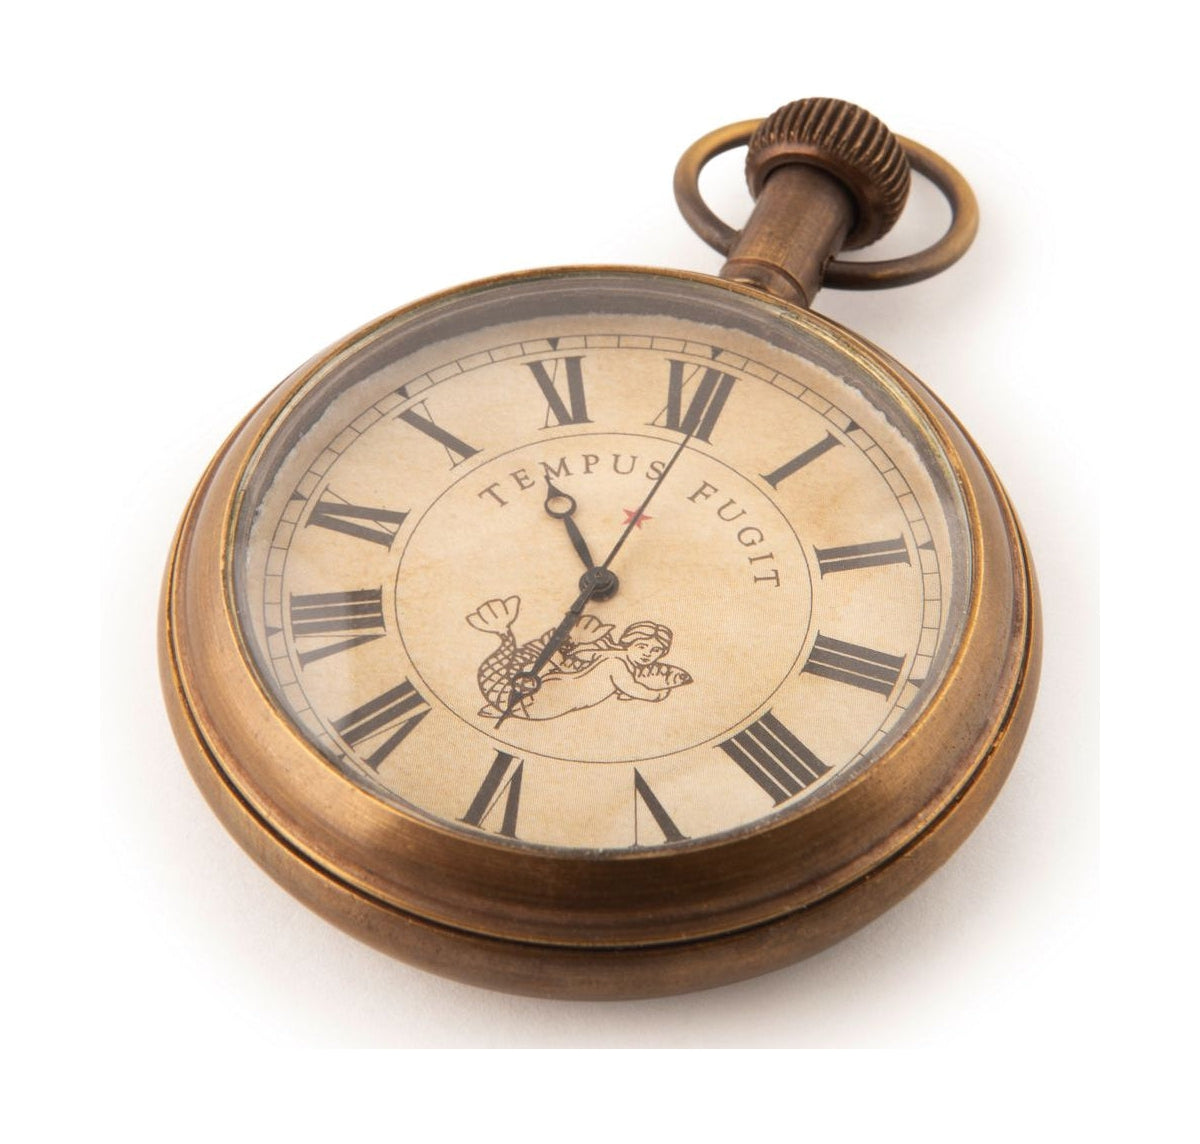 Authentic Models Victorian Pocket Watch